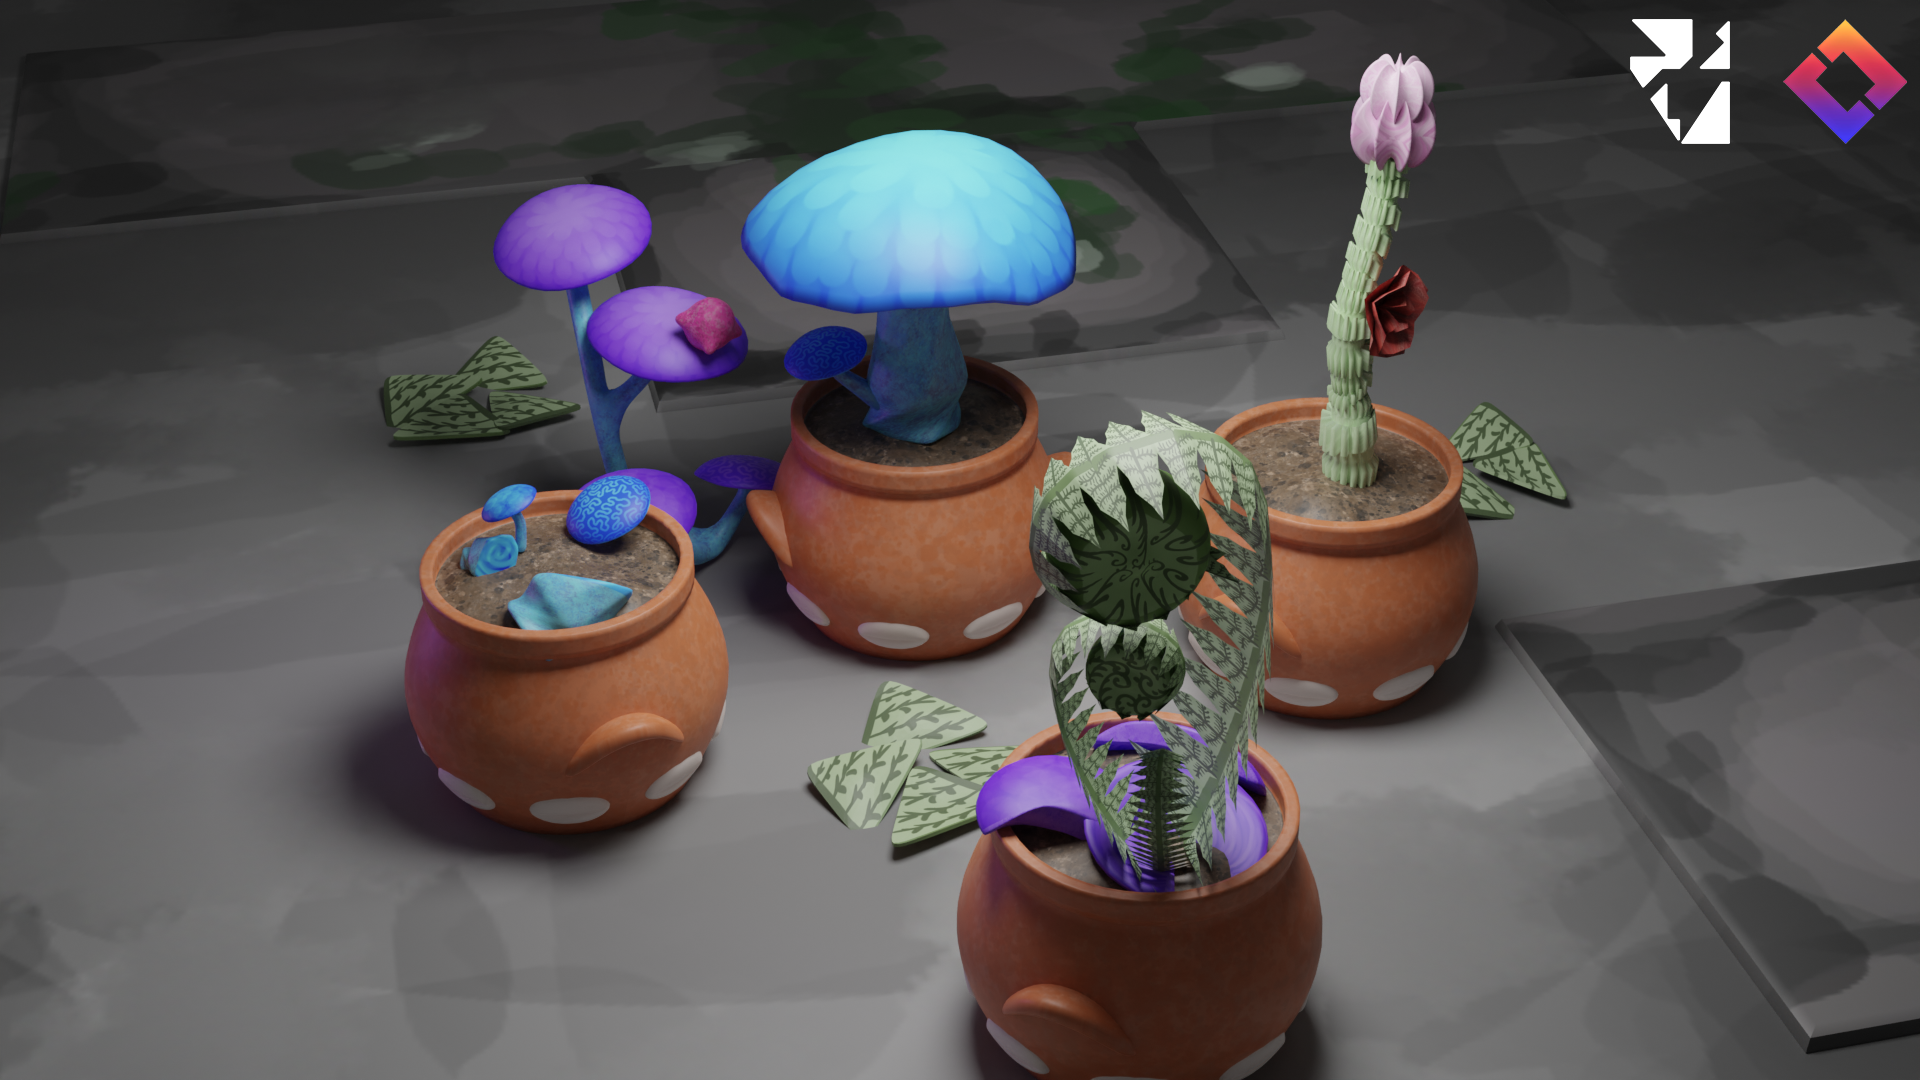 Cultivation of plants and shrooms